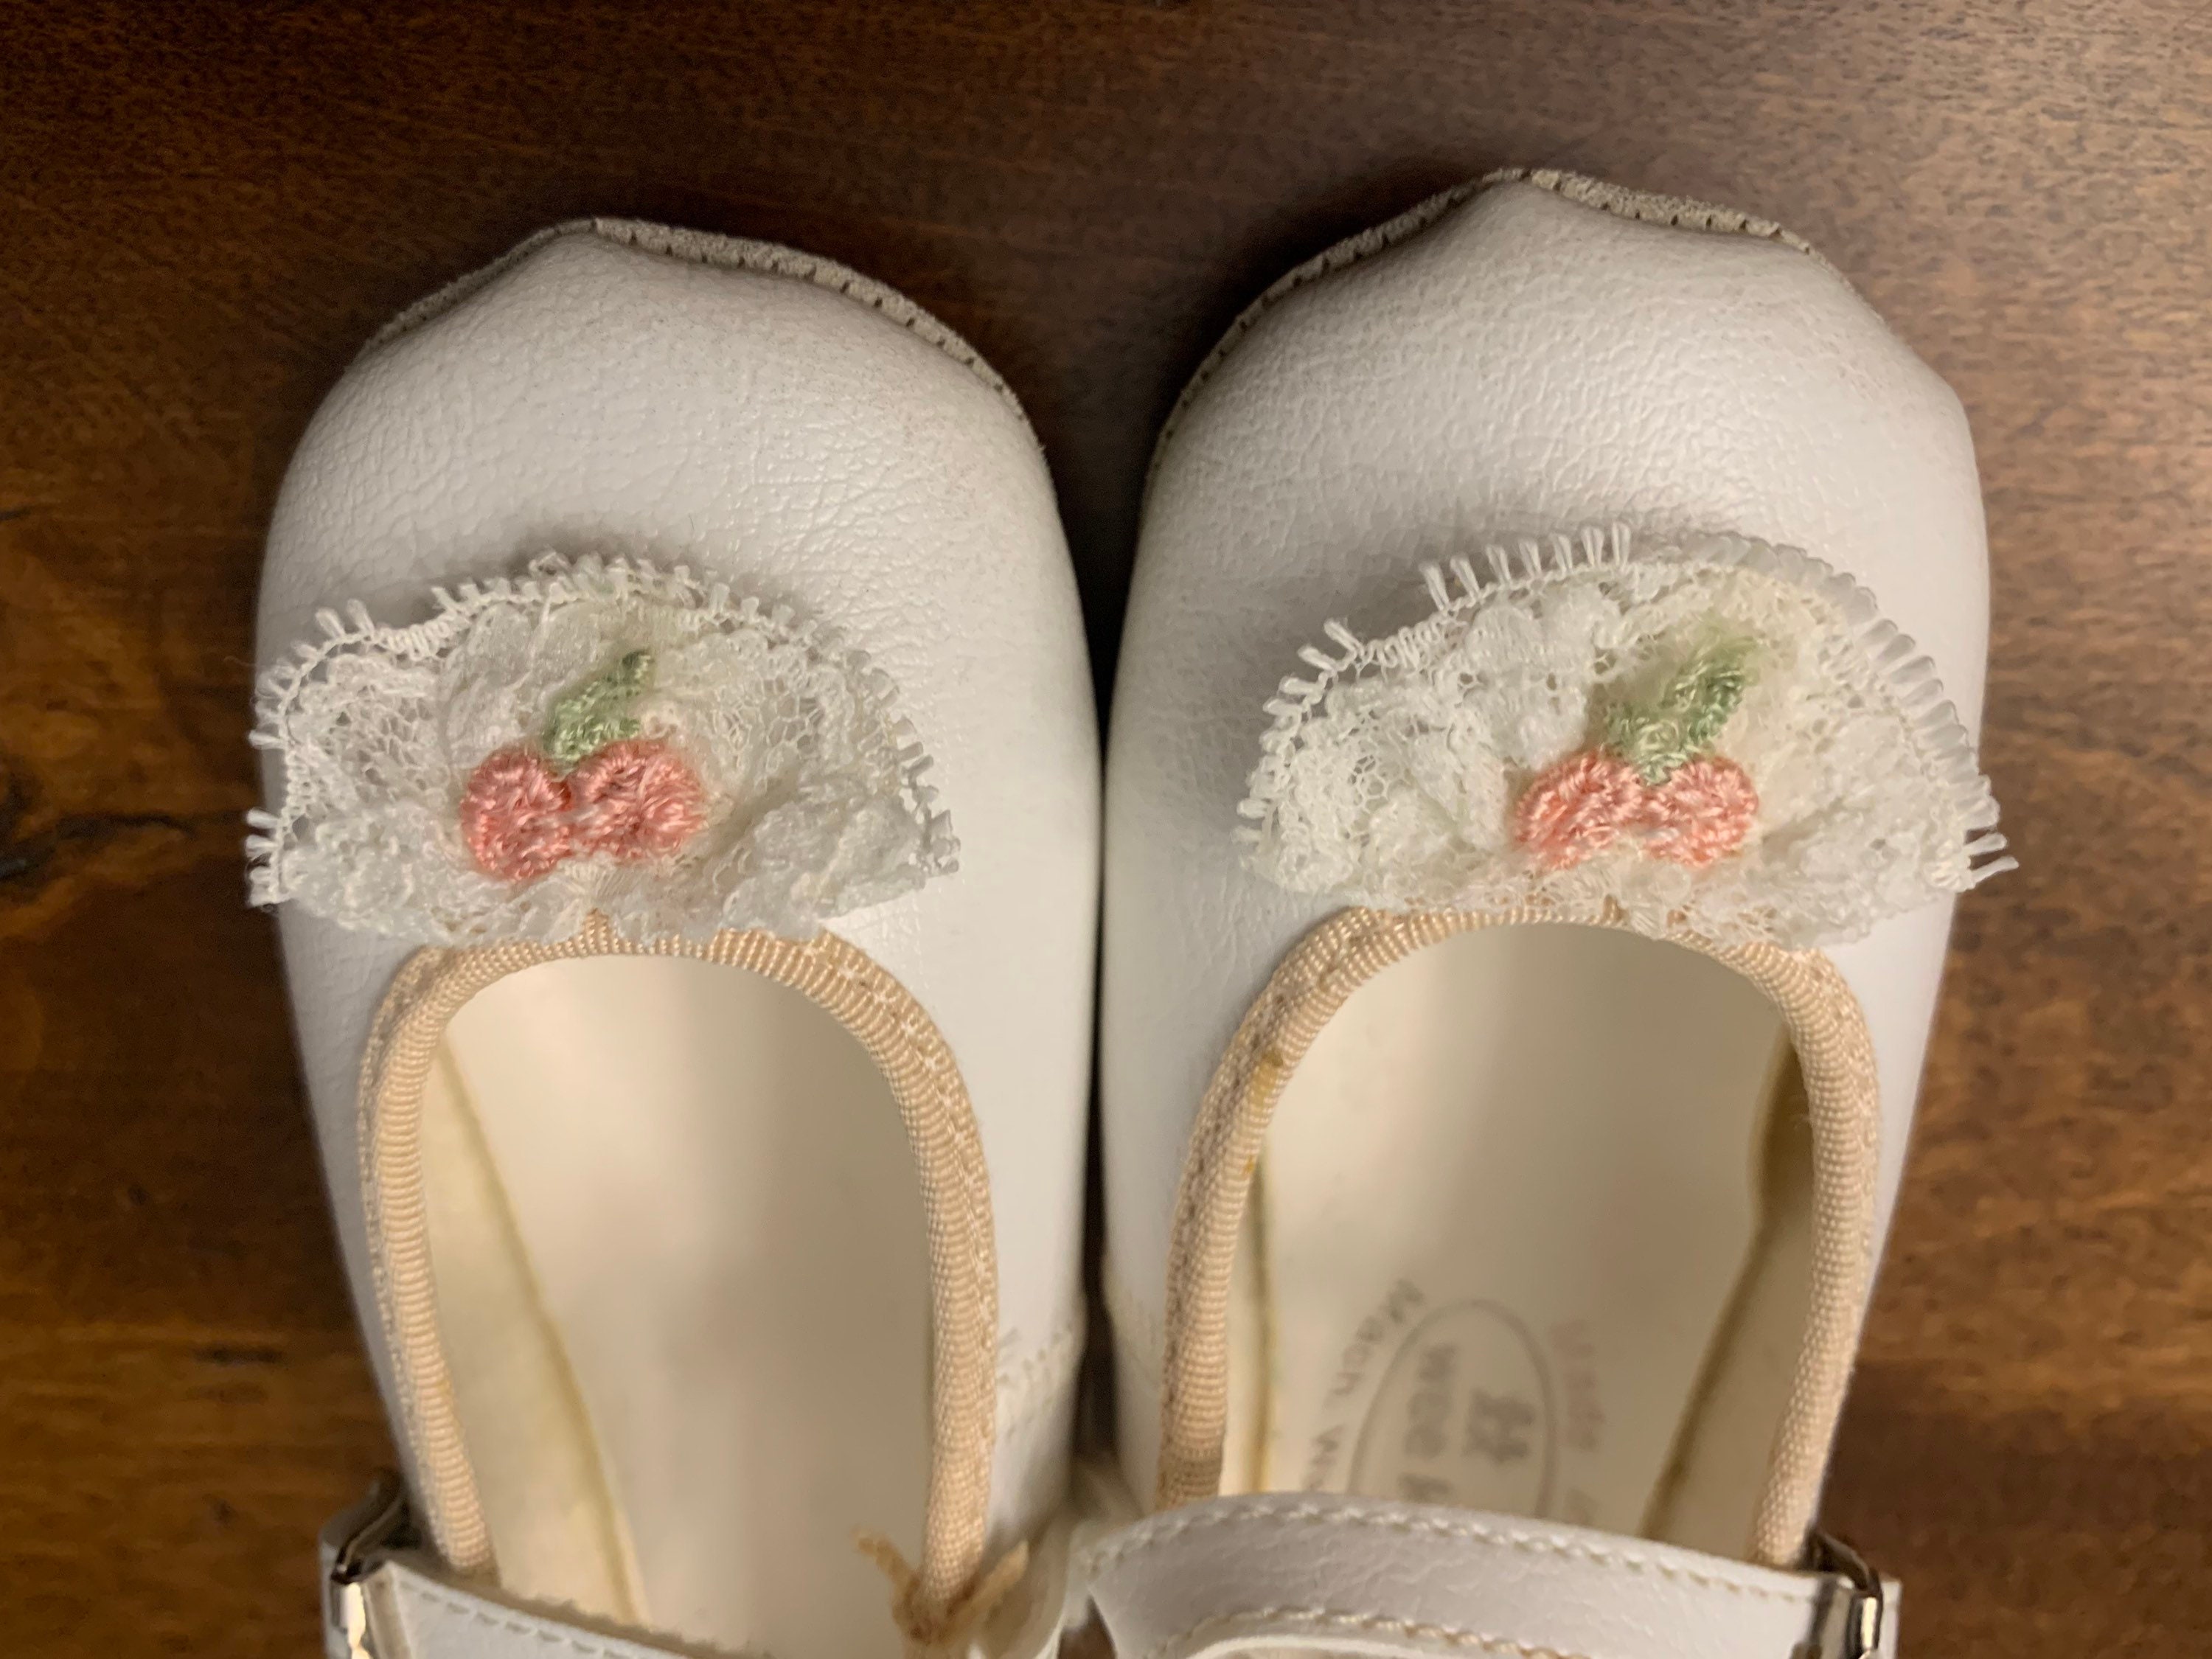 typically 6-9 months Vintage Wee Baby white dress shoes with lace and pink flower details Schoenen Meisjesschoenen Mary Janes size 3 